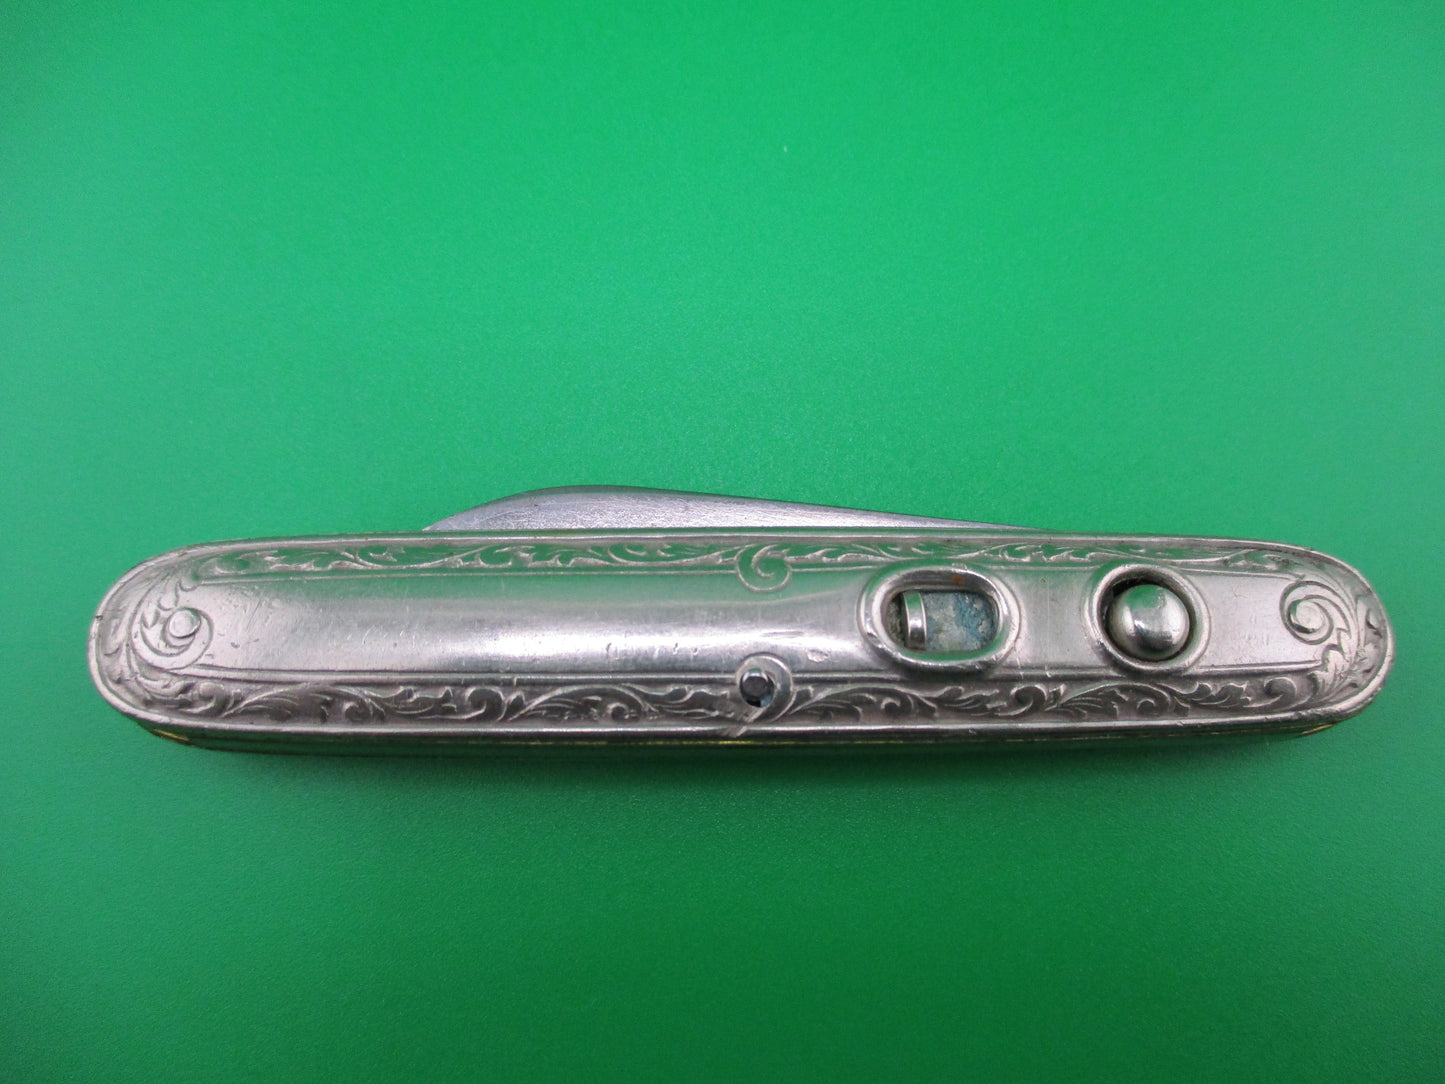 Schrade Cut Co Sterling Silver medium Double